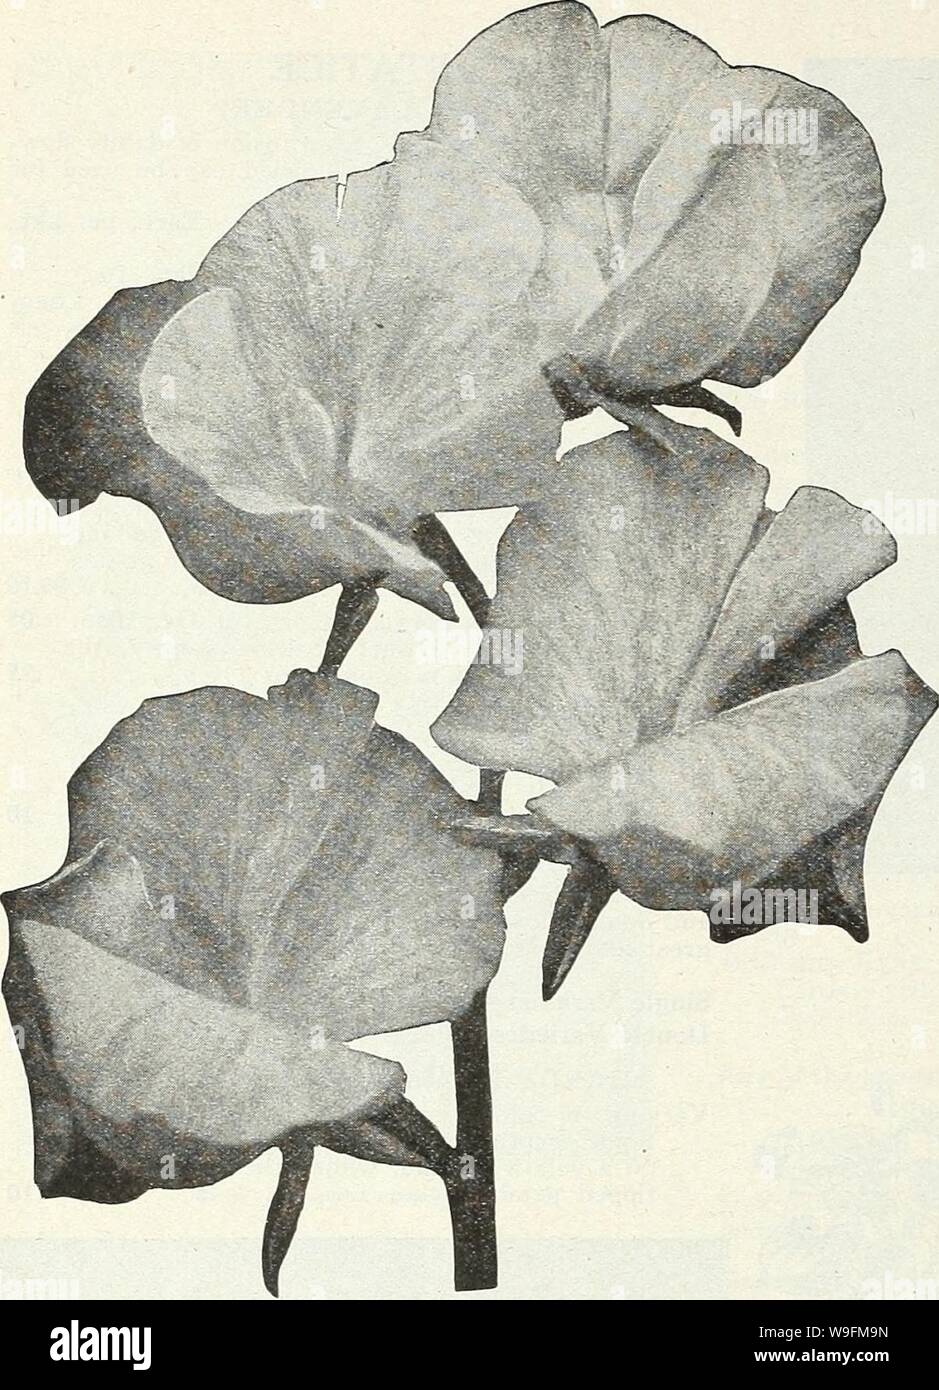 Archive image from page 53 of Currie's garden annual  spring. Currie's garden annual : spring 1931 56th year  curriesgardenann19curr Year: 1931 ( CURRIE BROTHERS CO. MILWAUKEE, WISCONSIN    SWEET PEAS Beautiful, Fragrant, Fashionable HOW TO GROW THEM Sweet Peas should be planted as early in spring as the ground can be worked. Rich loam with an abundance of well rotted manure is an ideal soil. A trench about 6 inches deep should be made, sowing the seed thinly in the bottom, and cover with an inch of soil, pressing it down firmly. Gradually fill in the trench as the plants grow, and thin out to Stock Photo